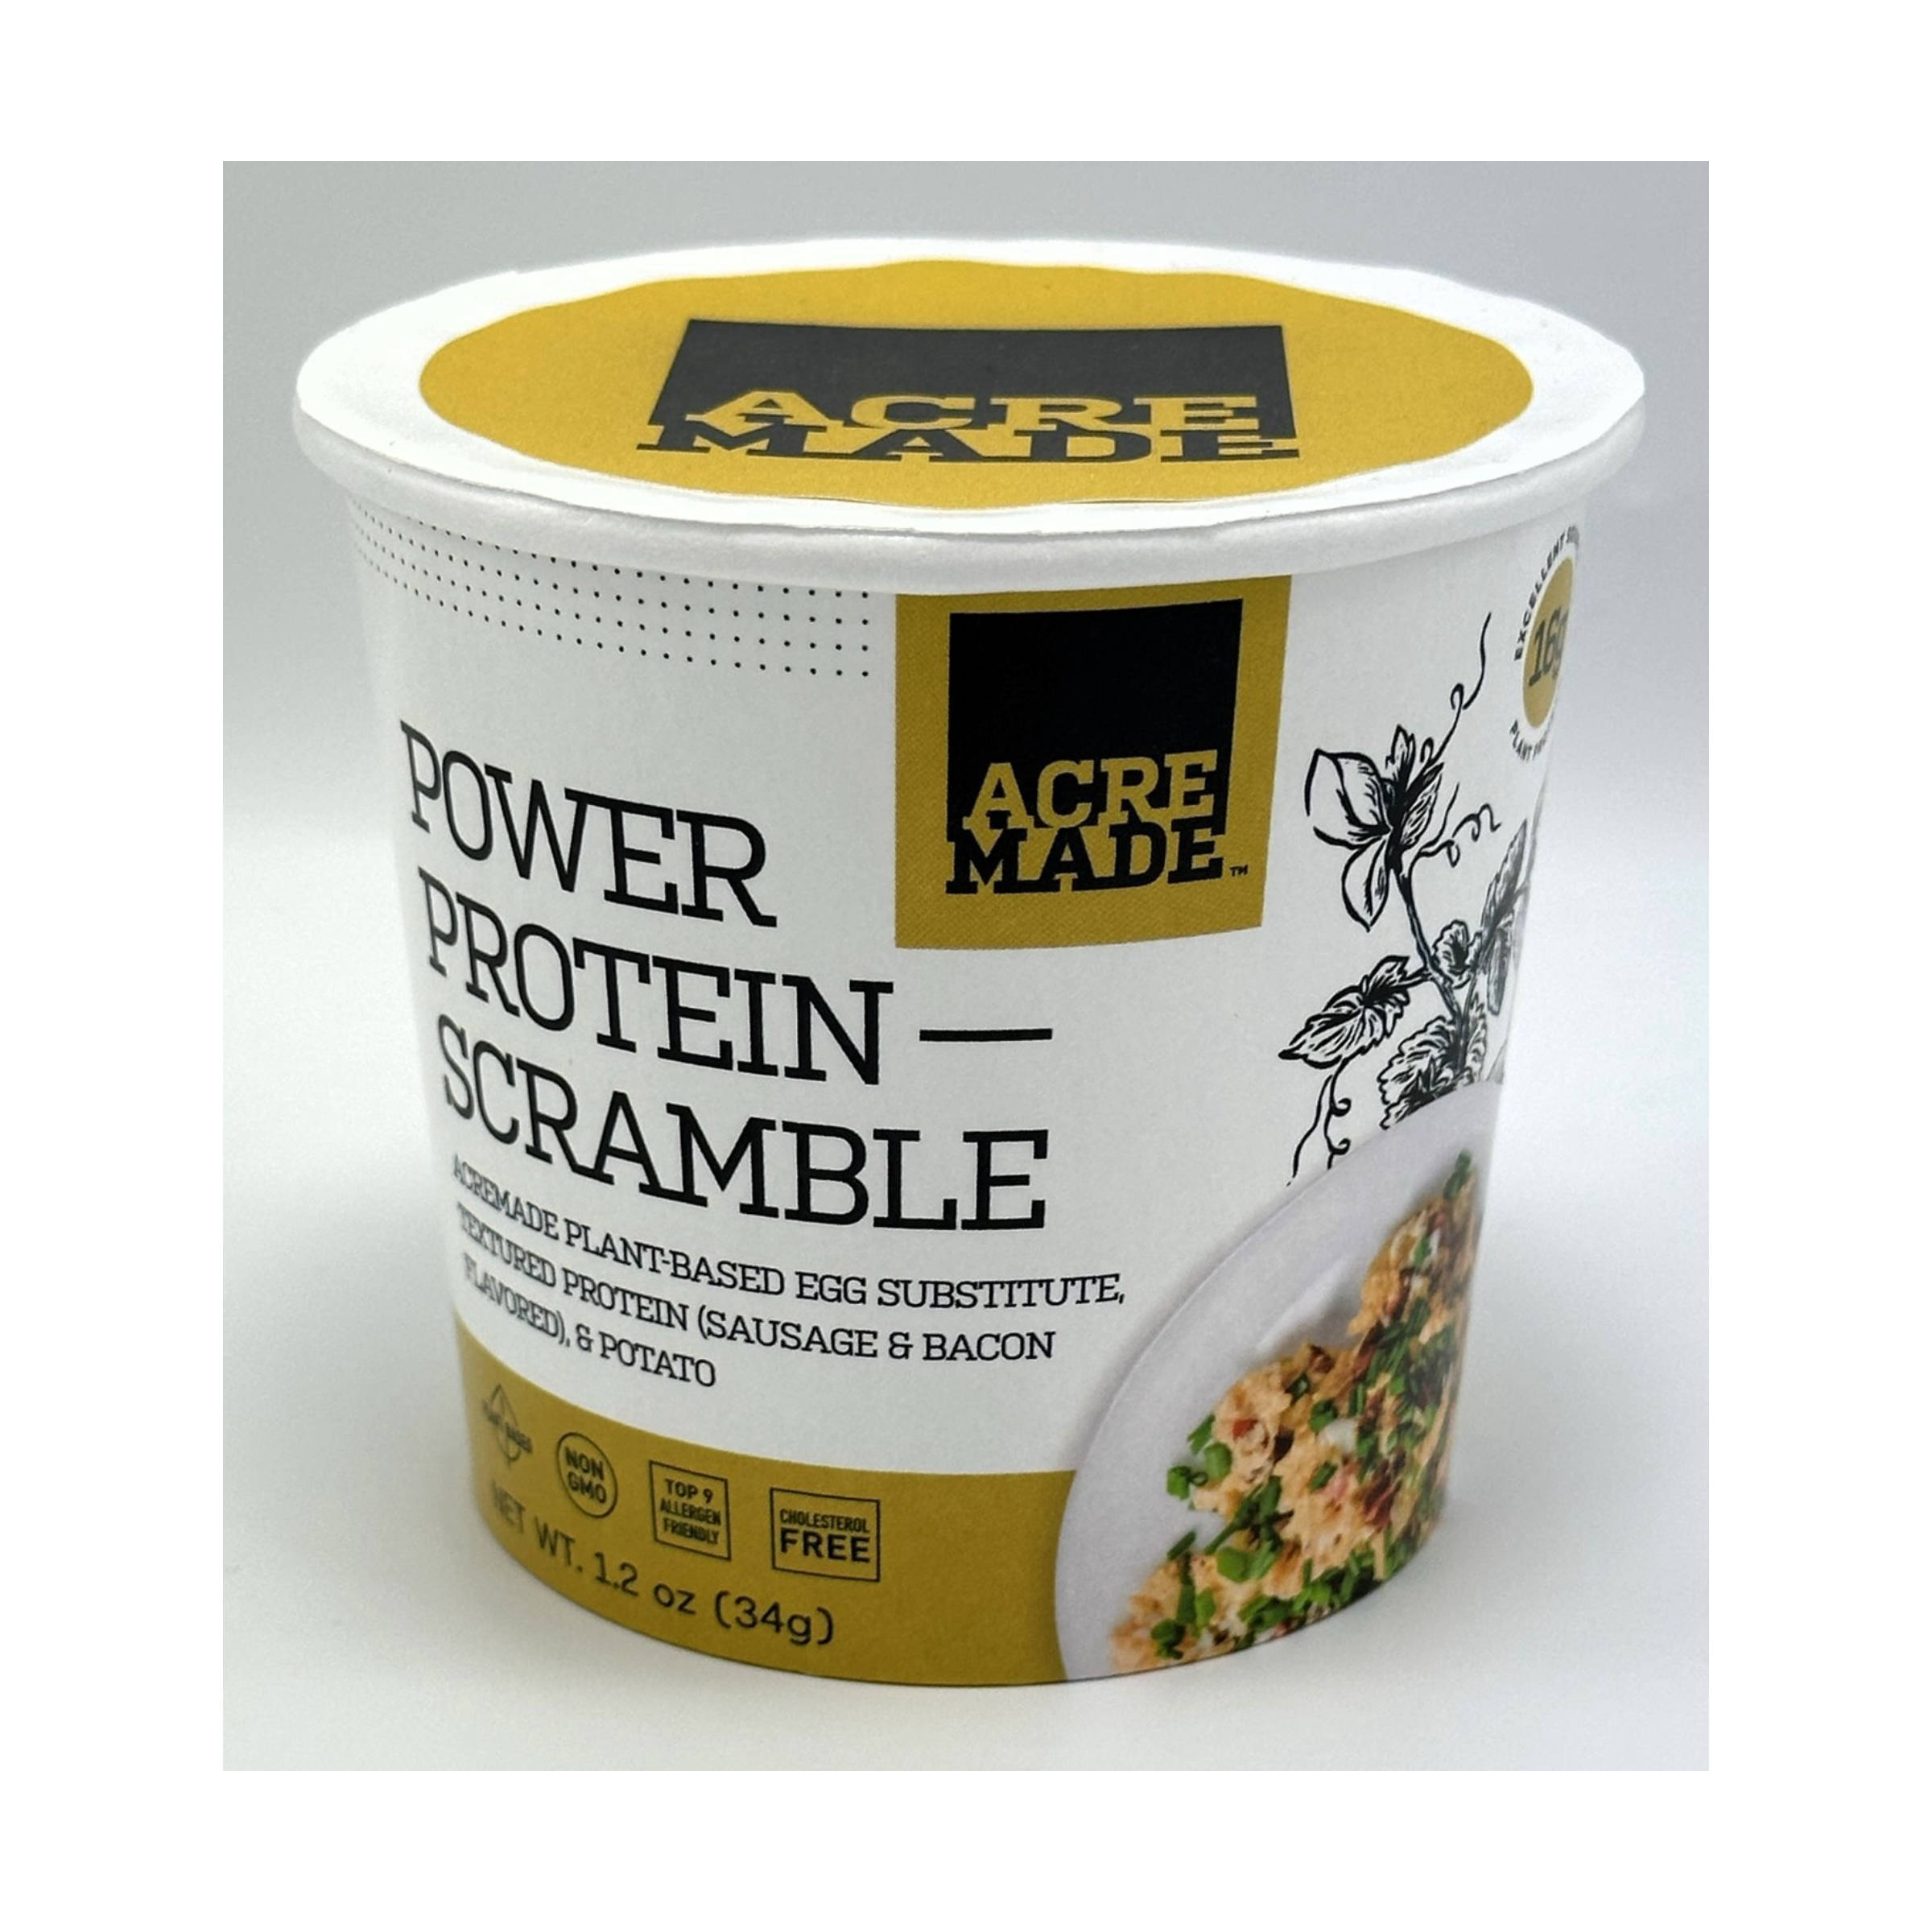 Power Protein Scramble Cup 8968